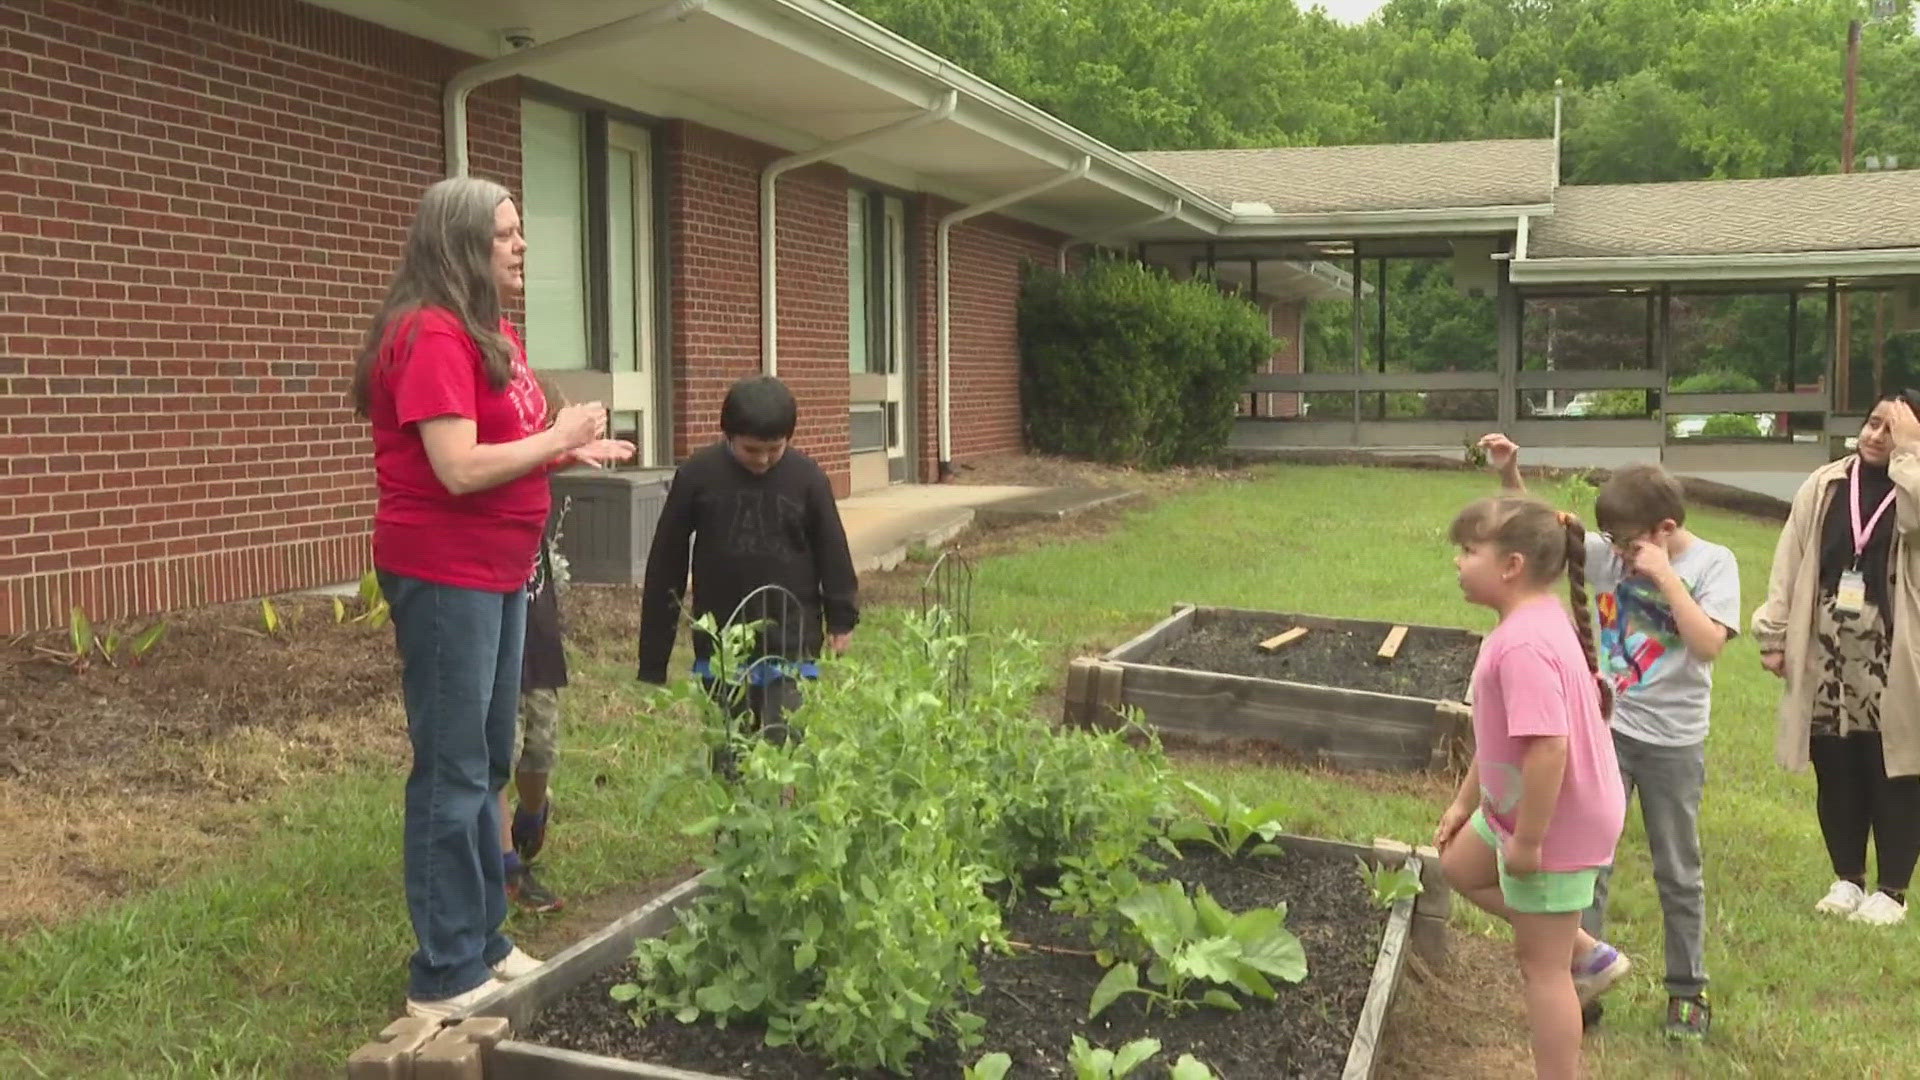 With help from the PTA, the Eagles installed garden beds, they are getting students out of their classroom walls and into the allure of nature.